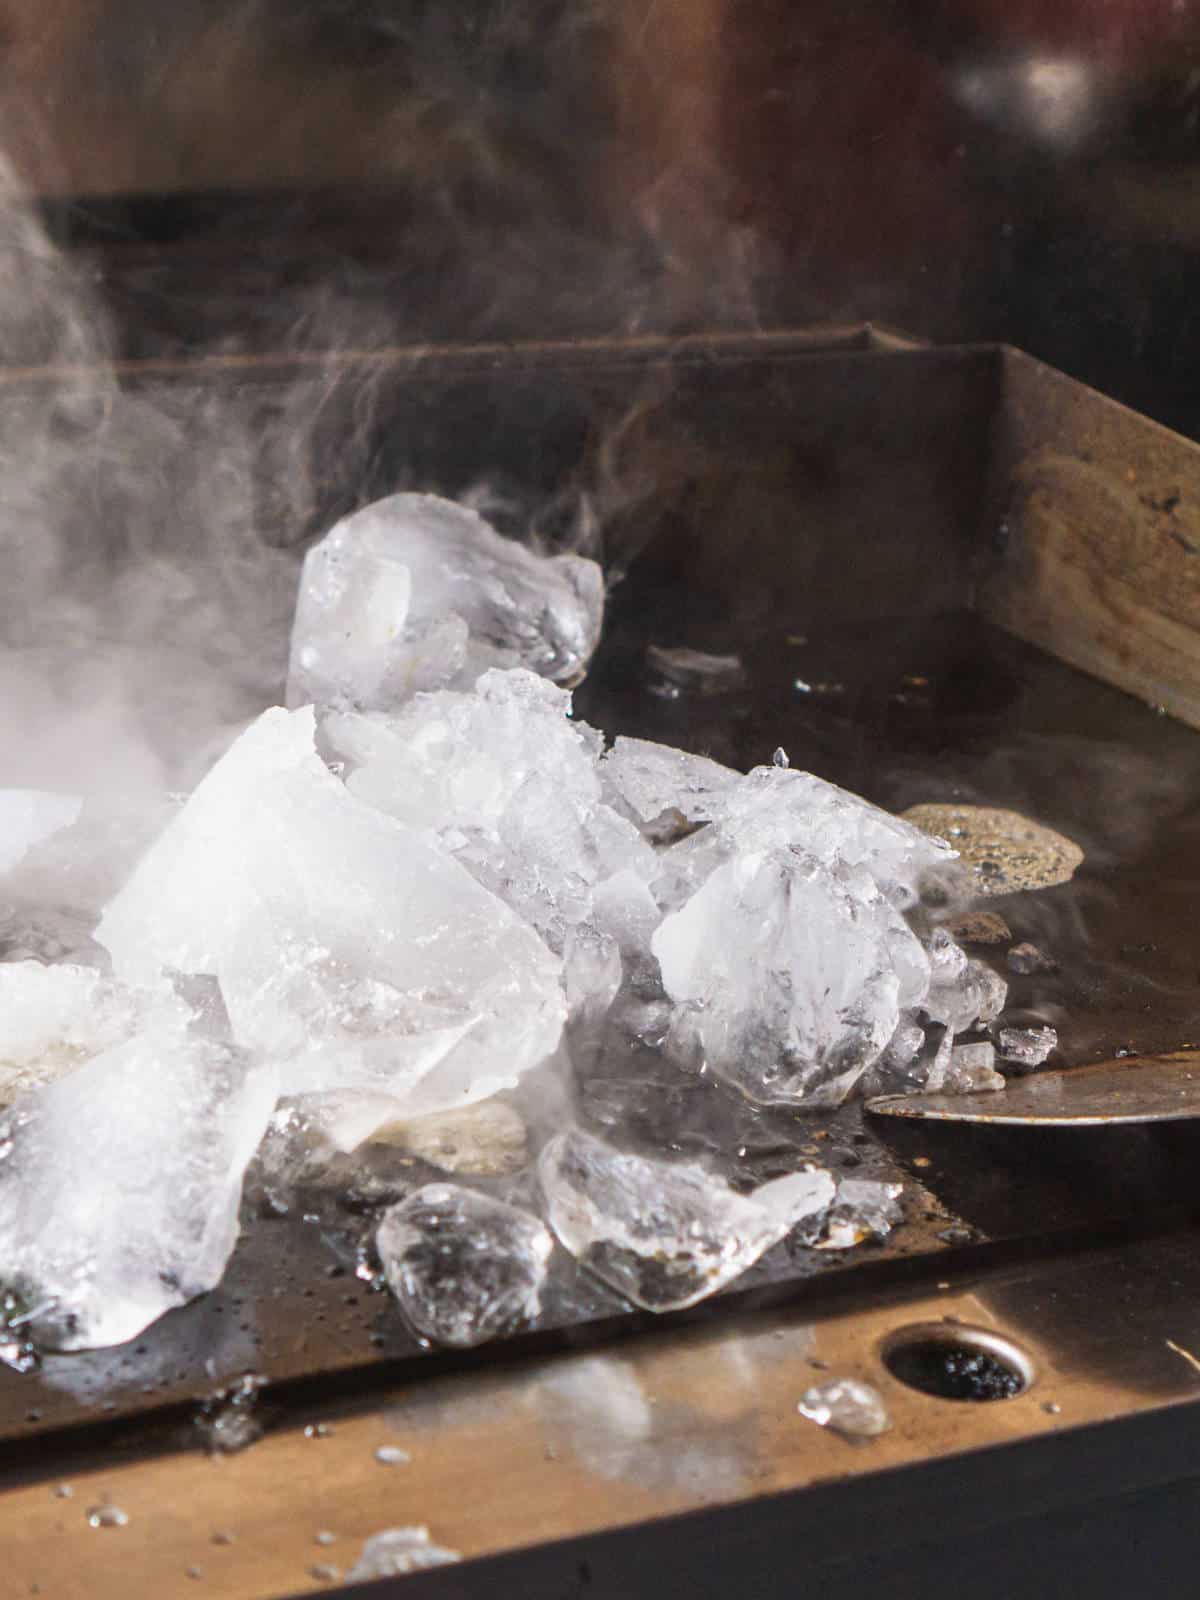 Using ice on a hot griddle is useful for cleaning grease, and stuck-on residue.